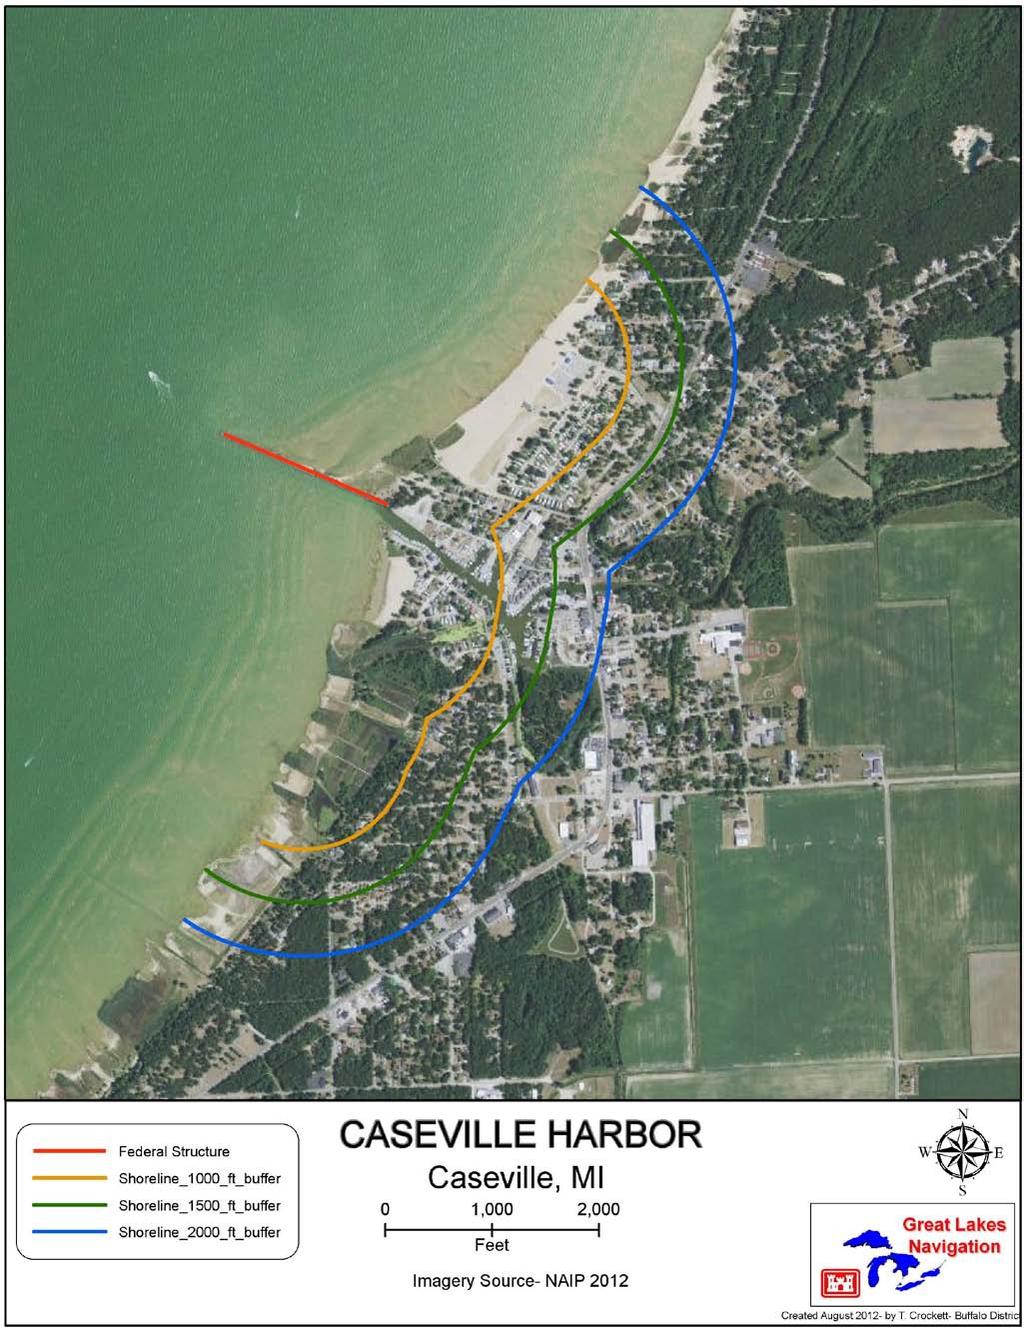 Potential Impact Area: The following graphic displays property parcels that could be impacted within various zones defined by different setbacks from the shoreline behind the existing Federal coastal